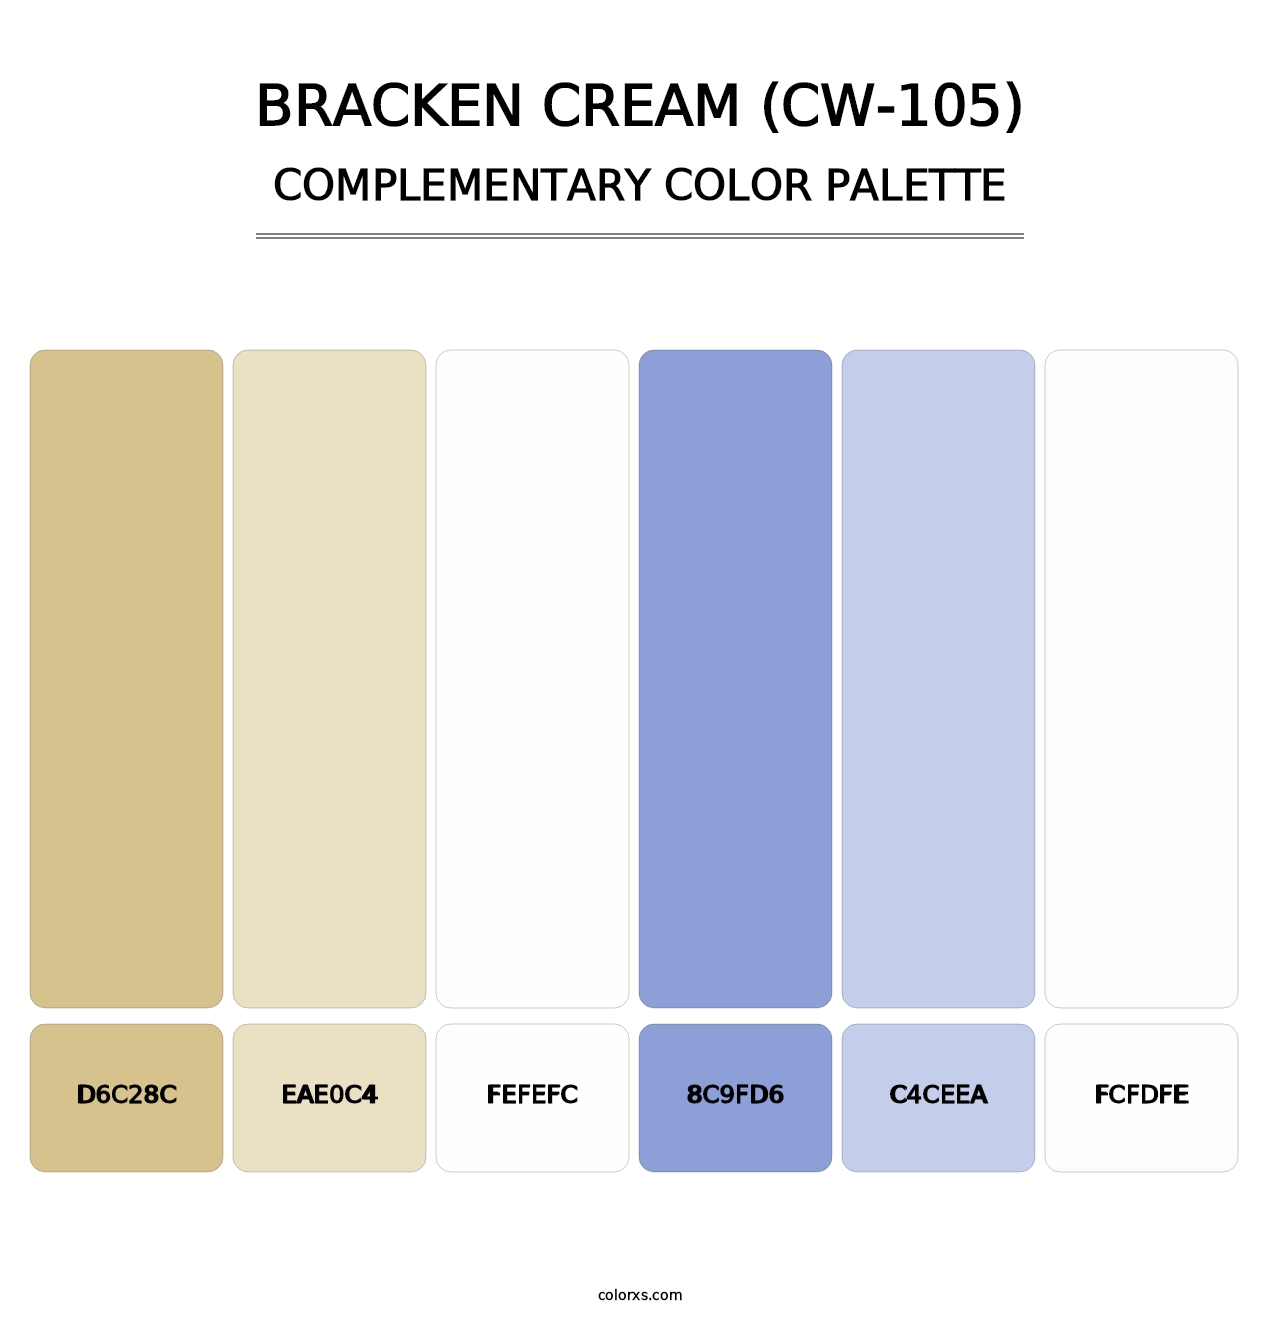 Bracken Cream (CW-105) - Complementary Color Palette